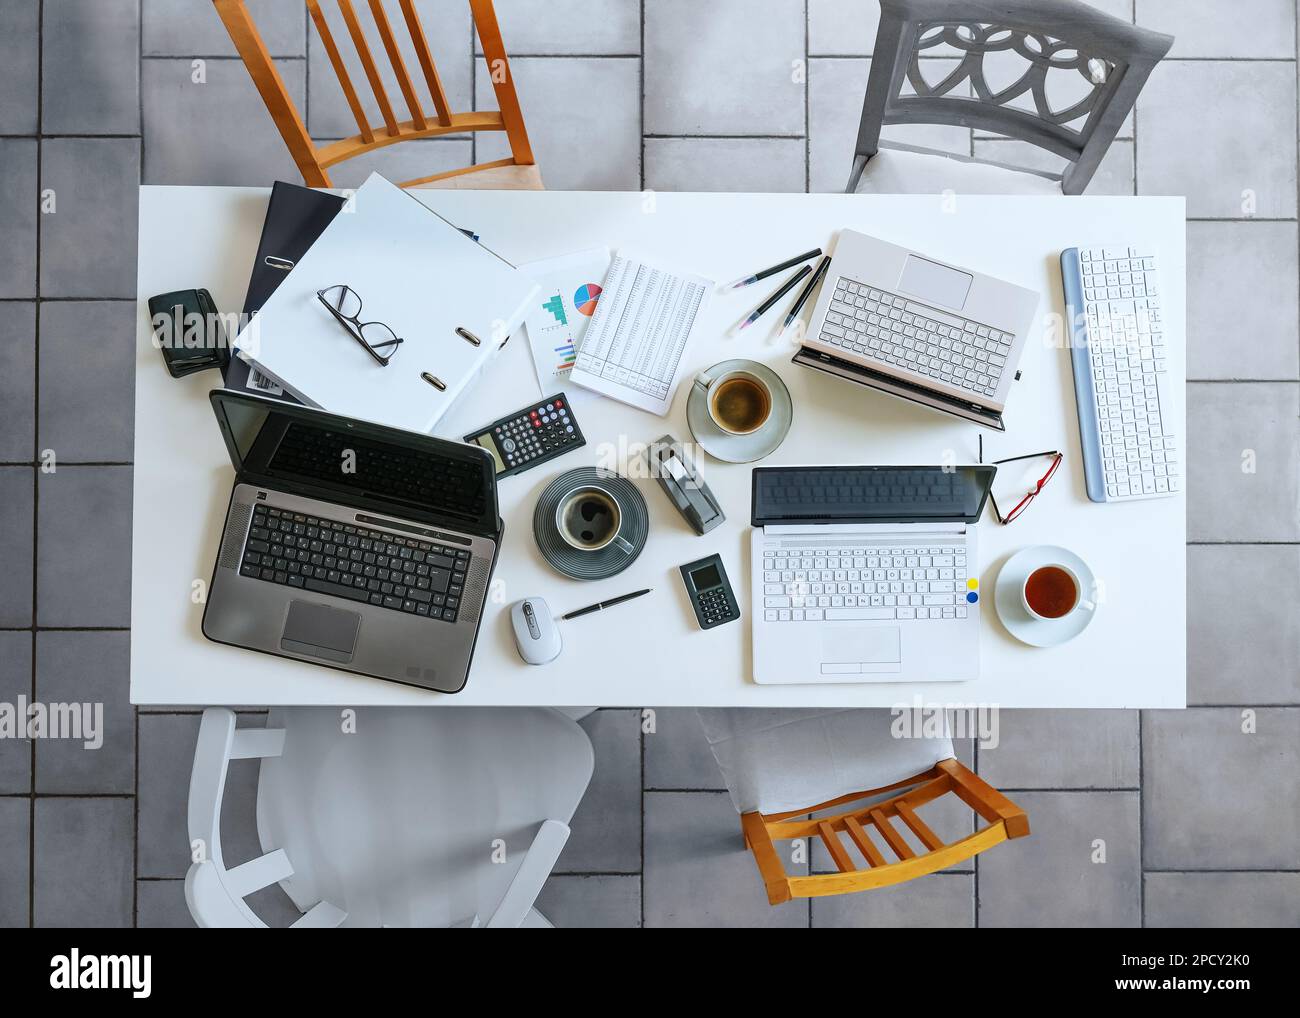 Top view of a small white meeting table with laptops, coffee, calculator, papers, ring binder and four casual chairs on a gray tiled floor business, h Stock Photo